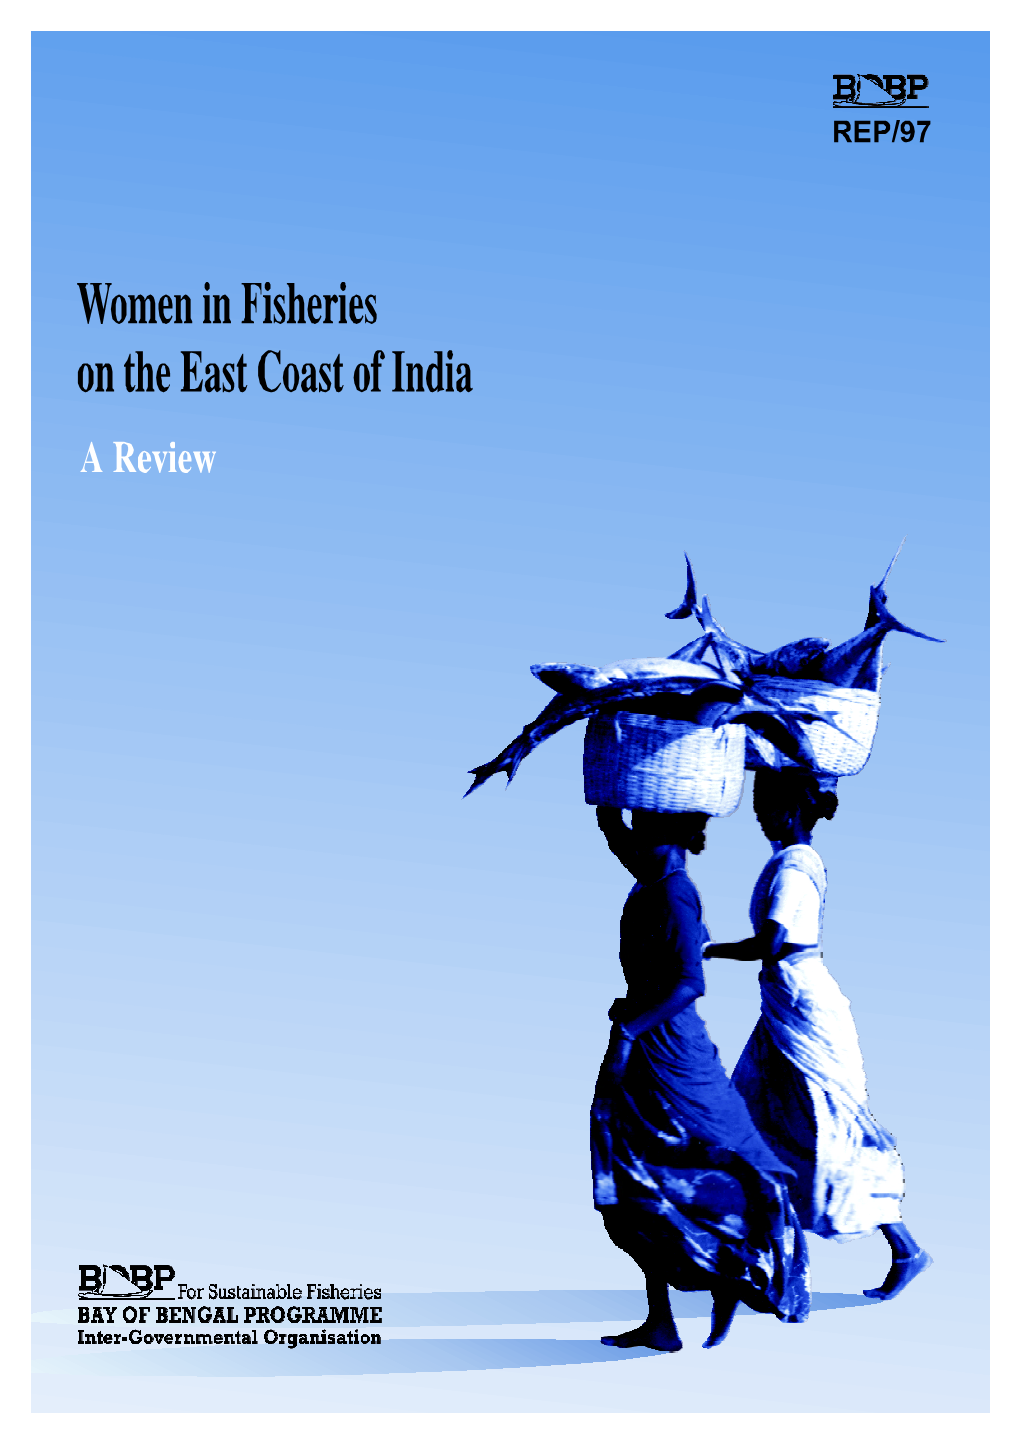 Women in Fisheries on the East Coast of India a Review